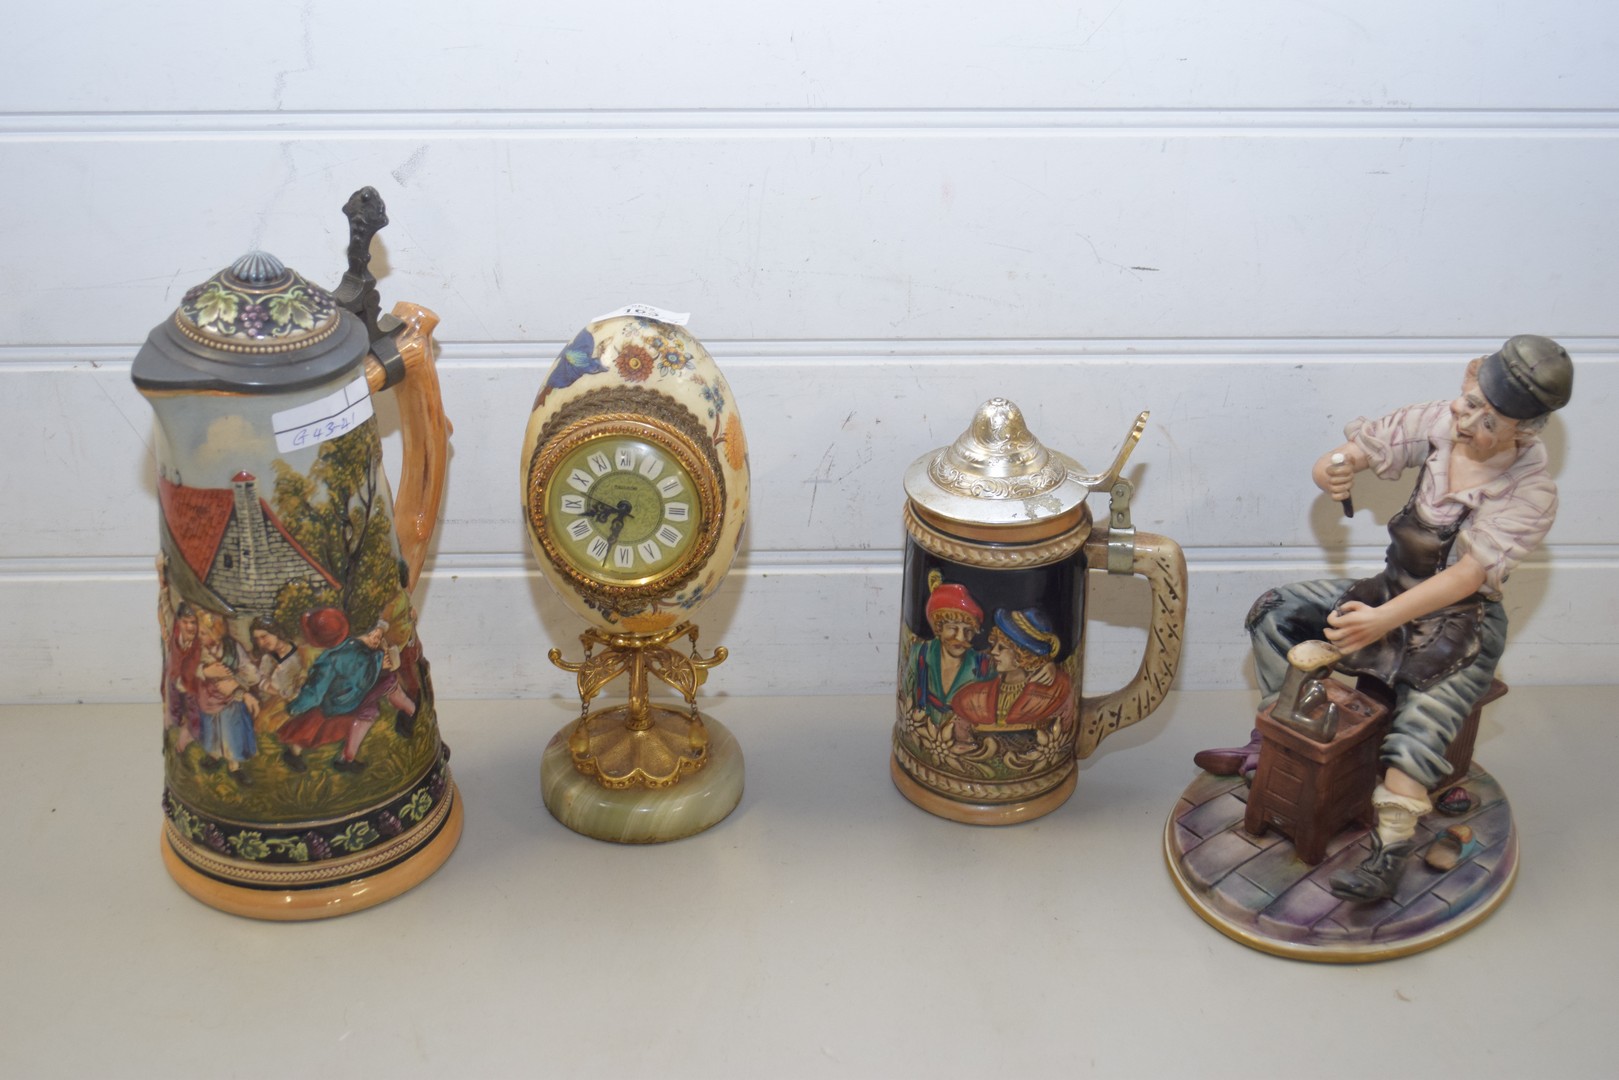 LARGE GERMAN POTTERY BEER STEIN DECORATED WITH FIGURES TOGETHER WITH A FURTHER SMALLER EXAMPLE, A